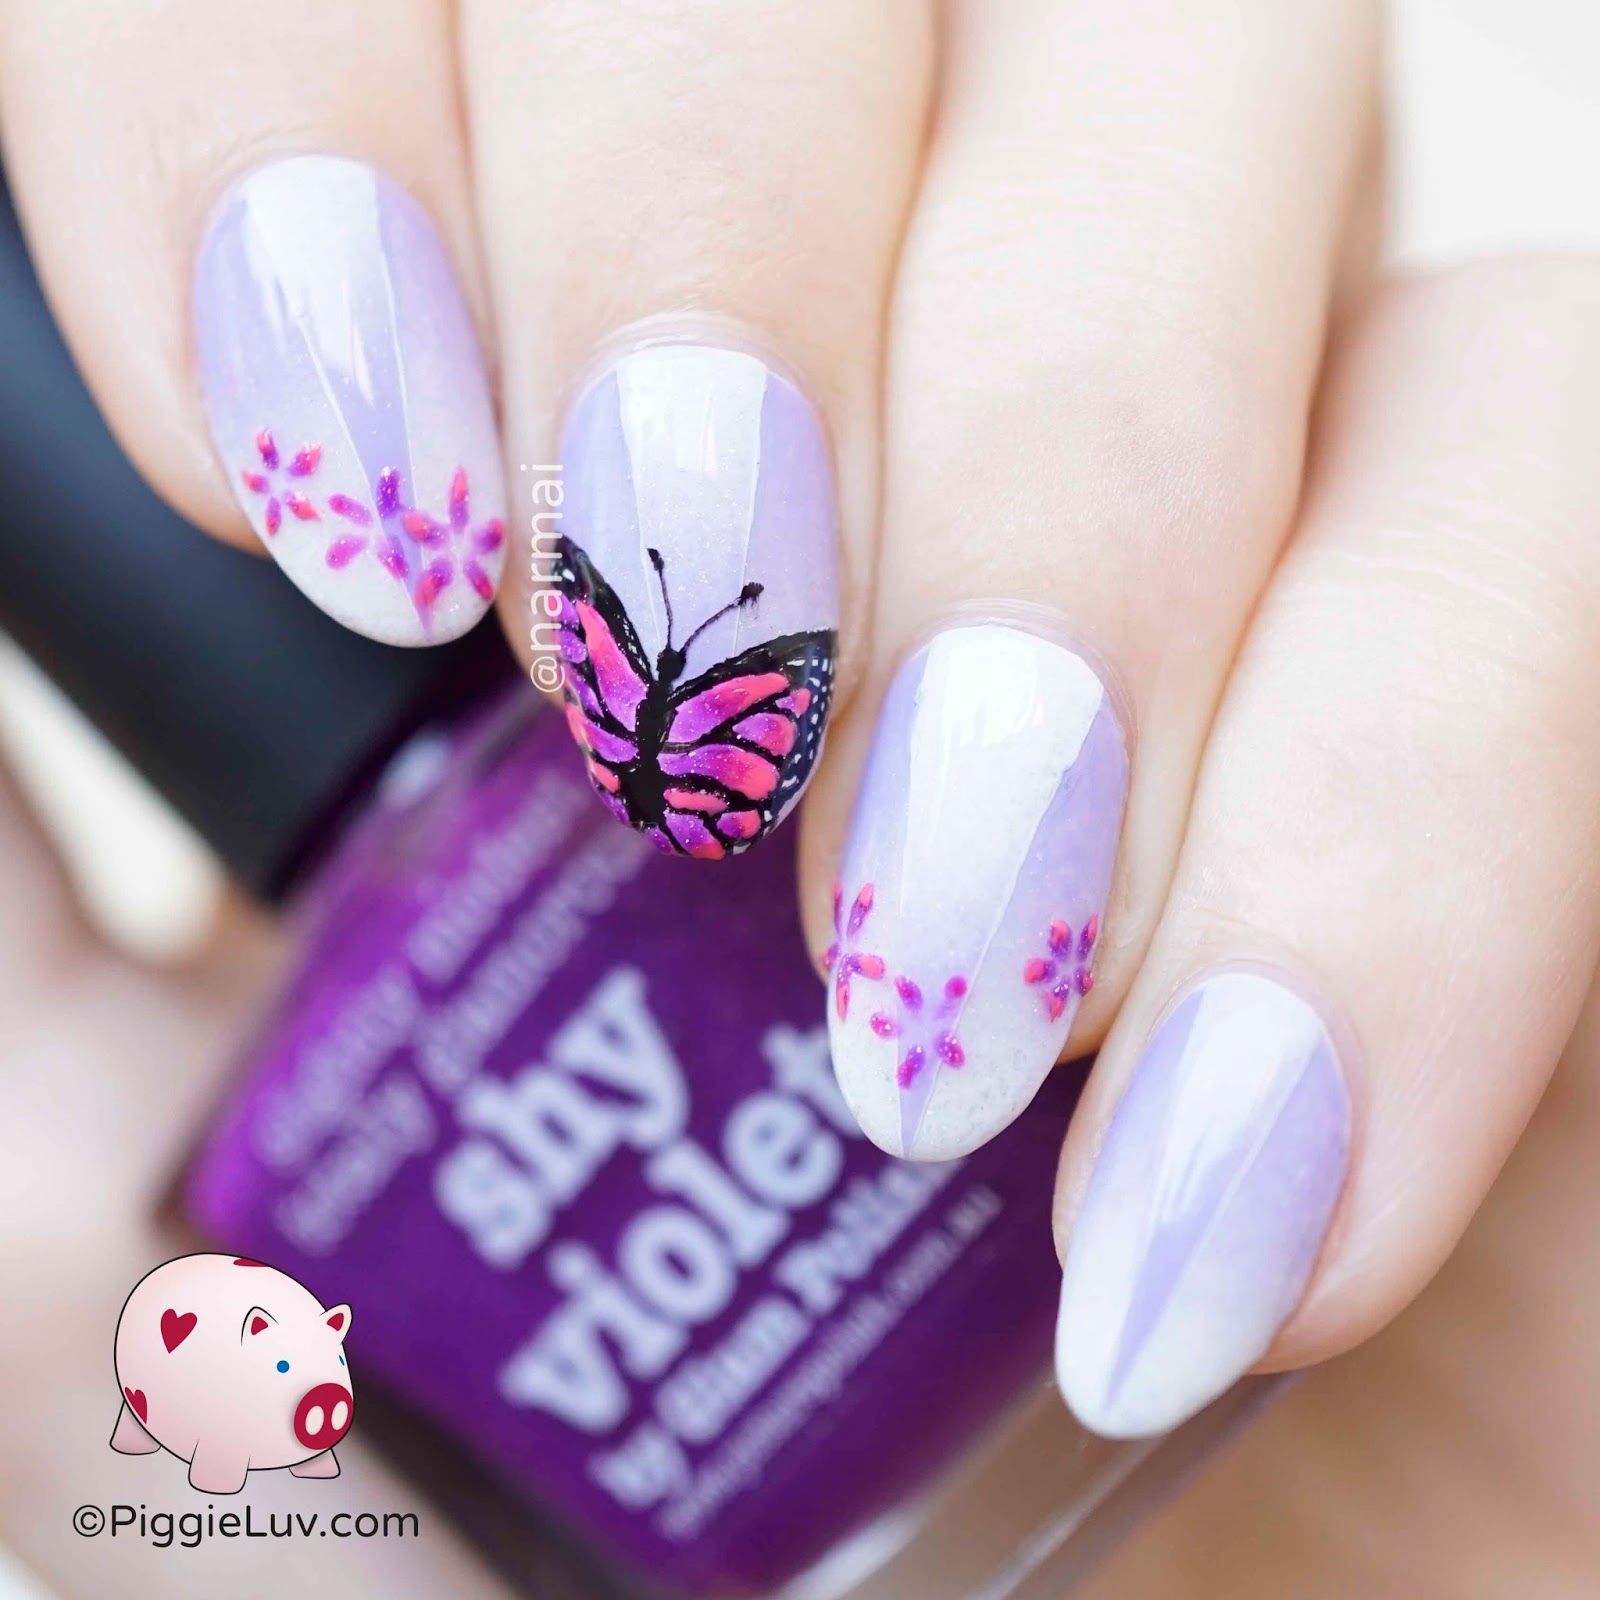 Gradient butterfly nail art for Picture Polish Challenge | PiggieLuv